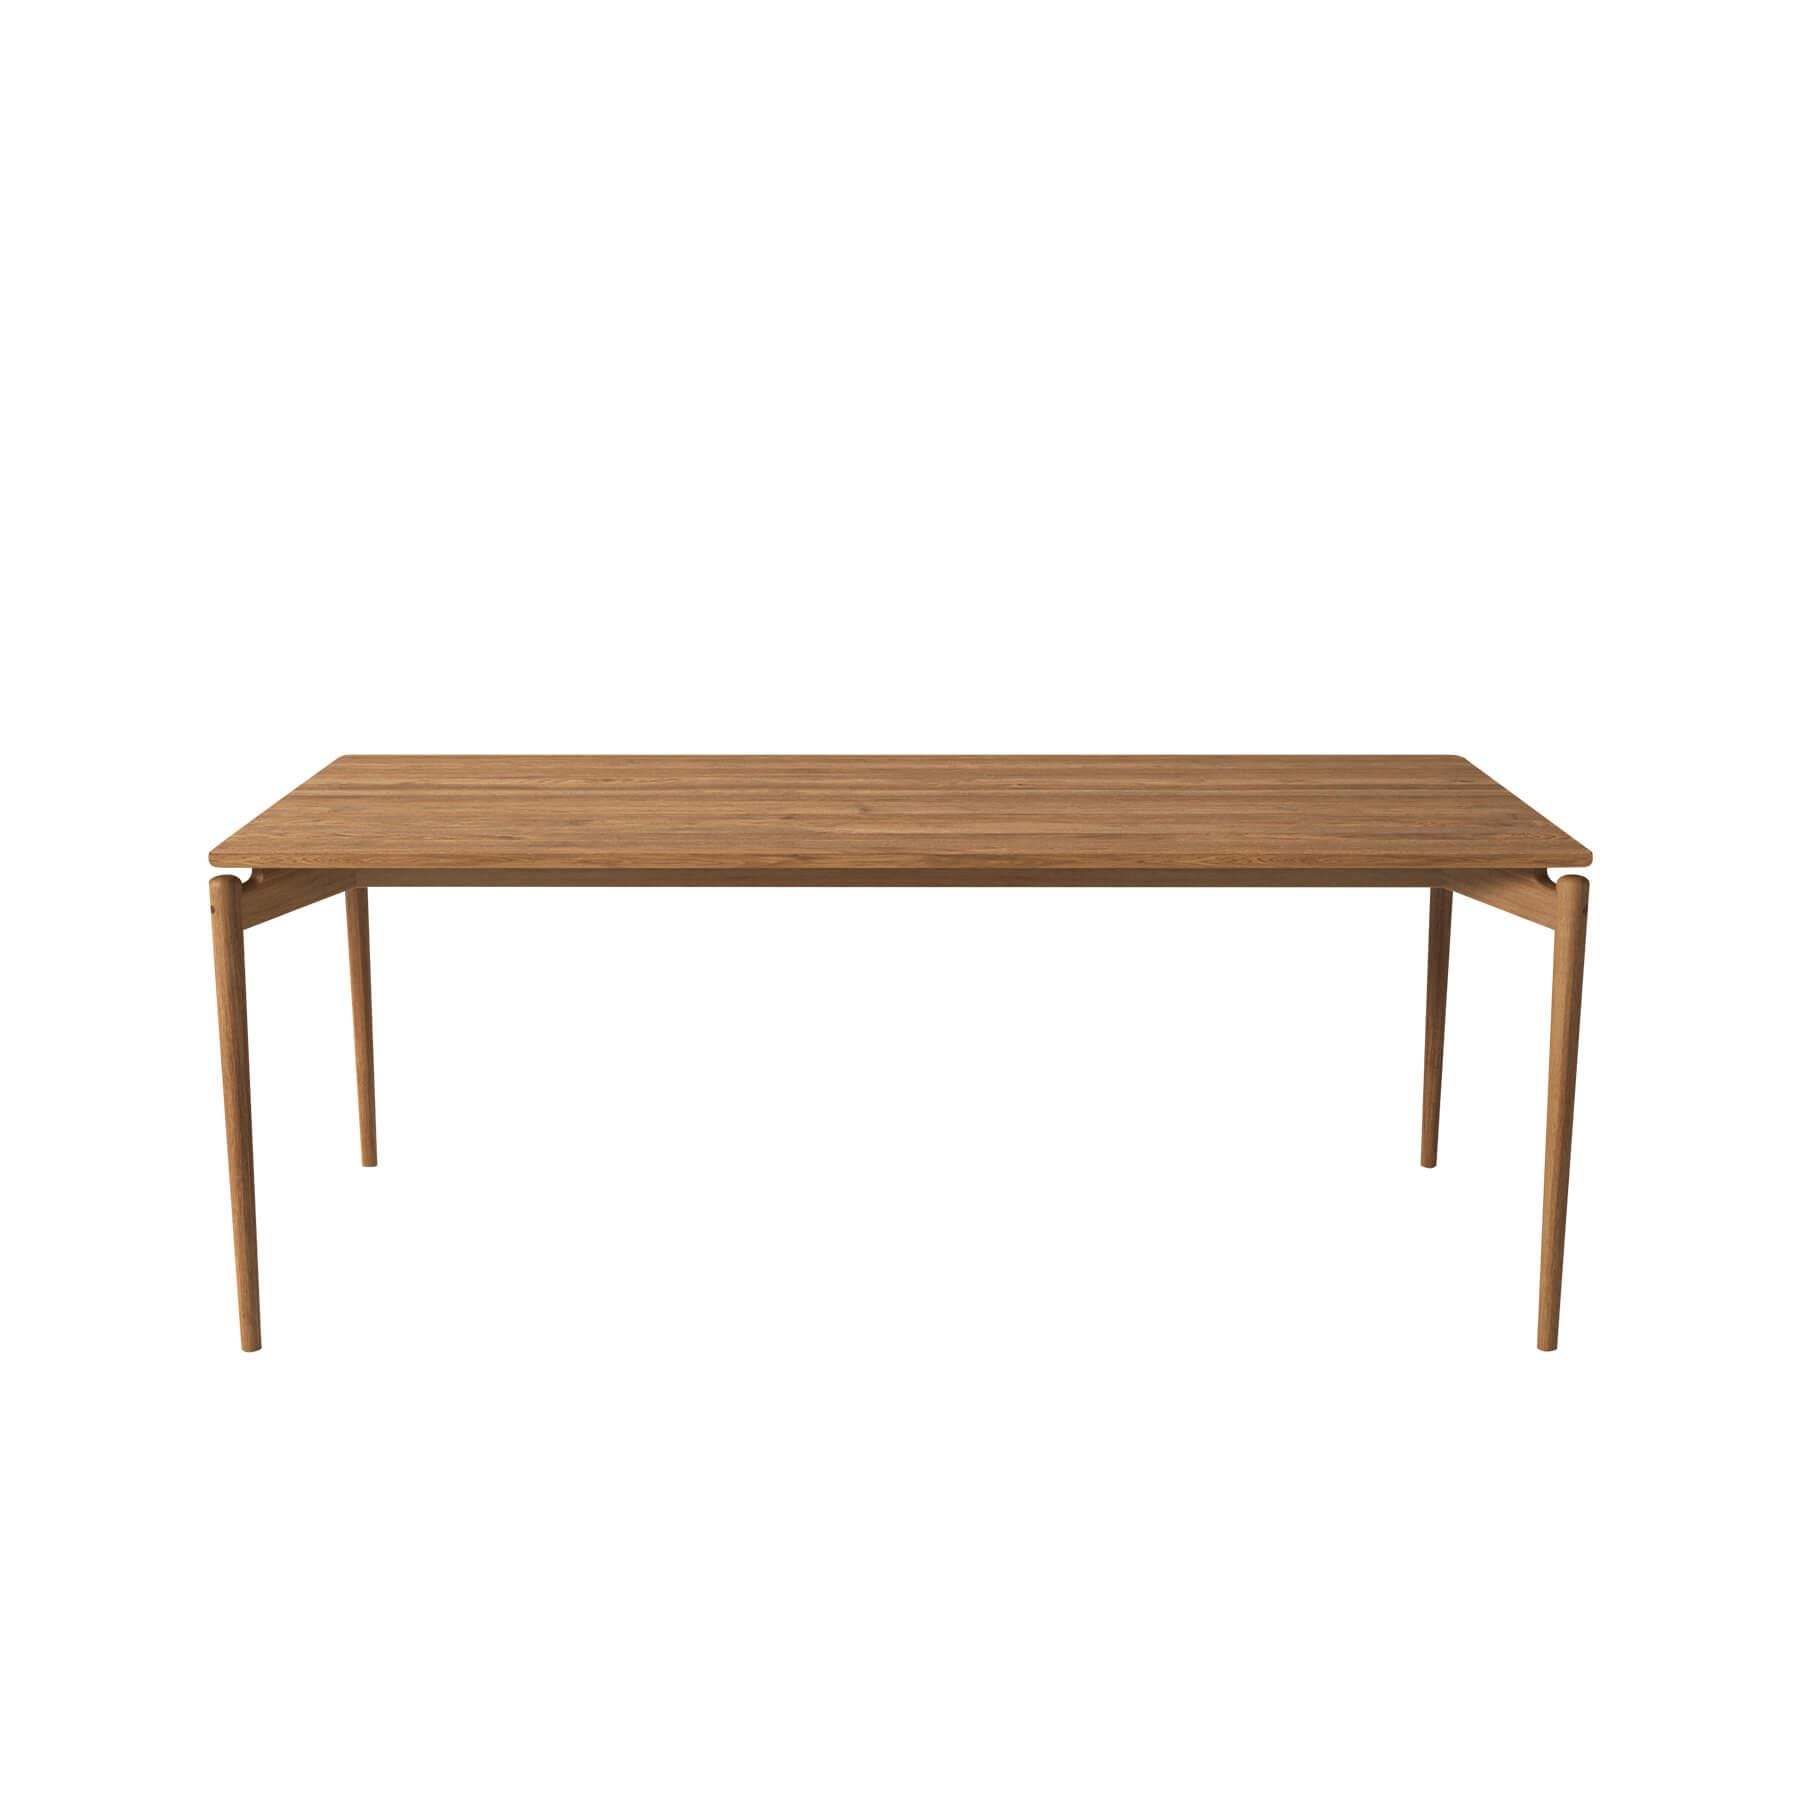 Bruunmunch Pure Dining Table 190cm Oak Natural Oil No Plates Light Wood Designer Furniture From Holloways Of Ludlow